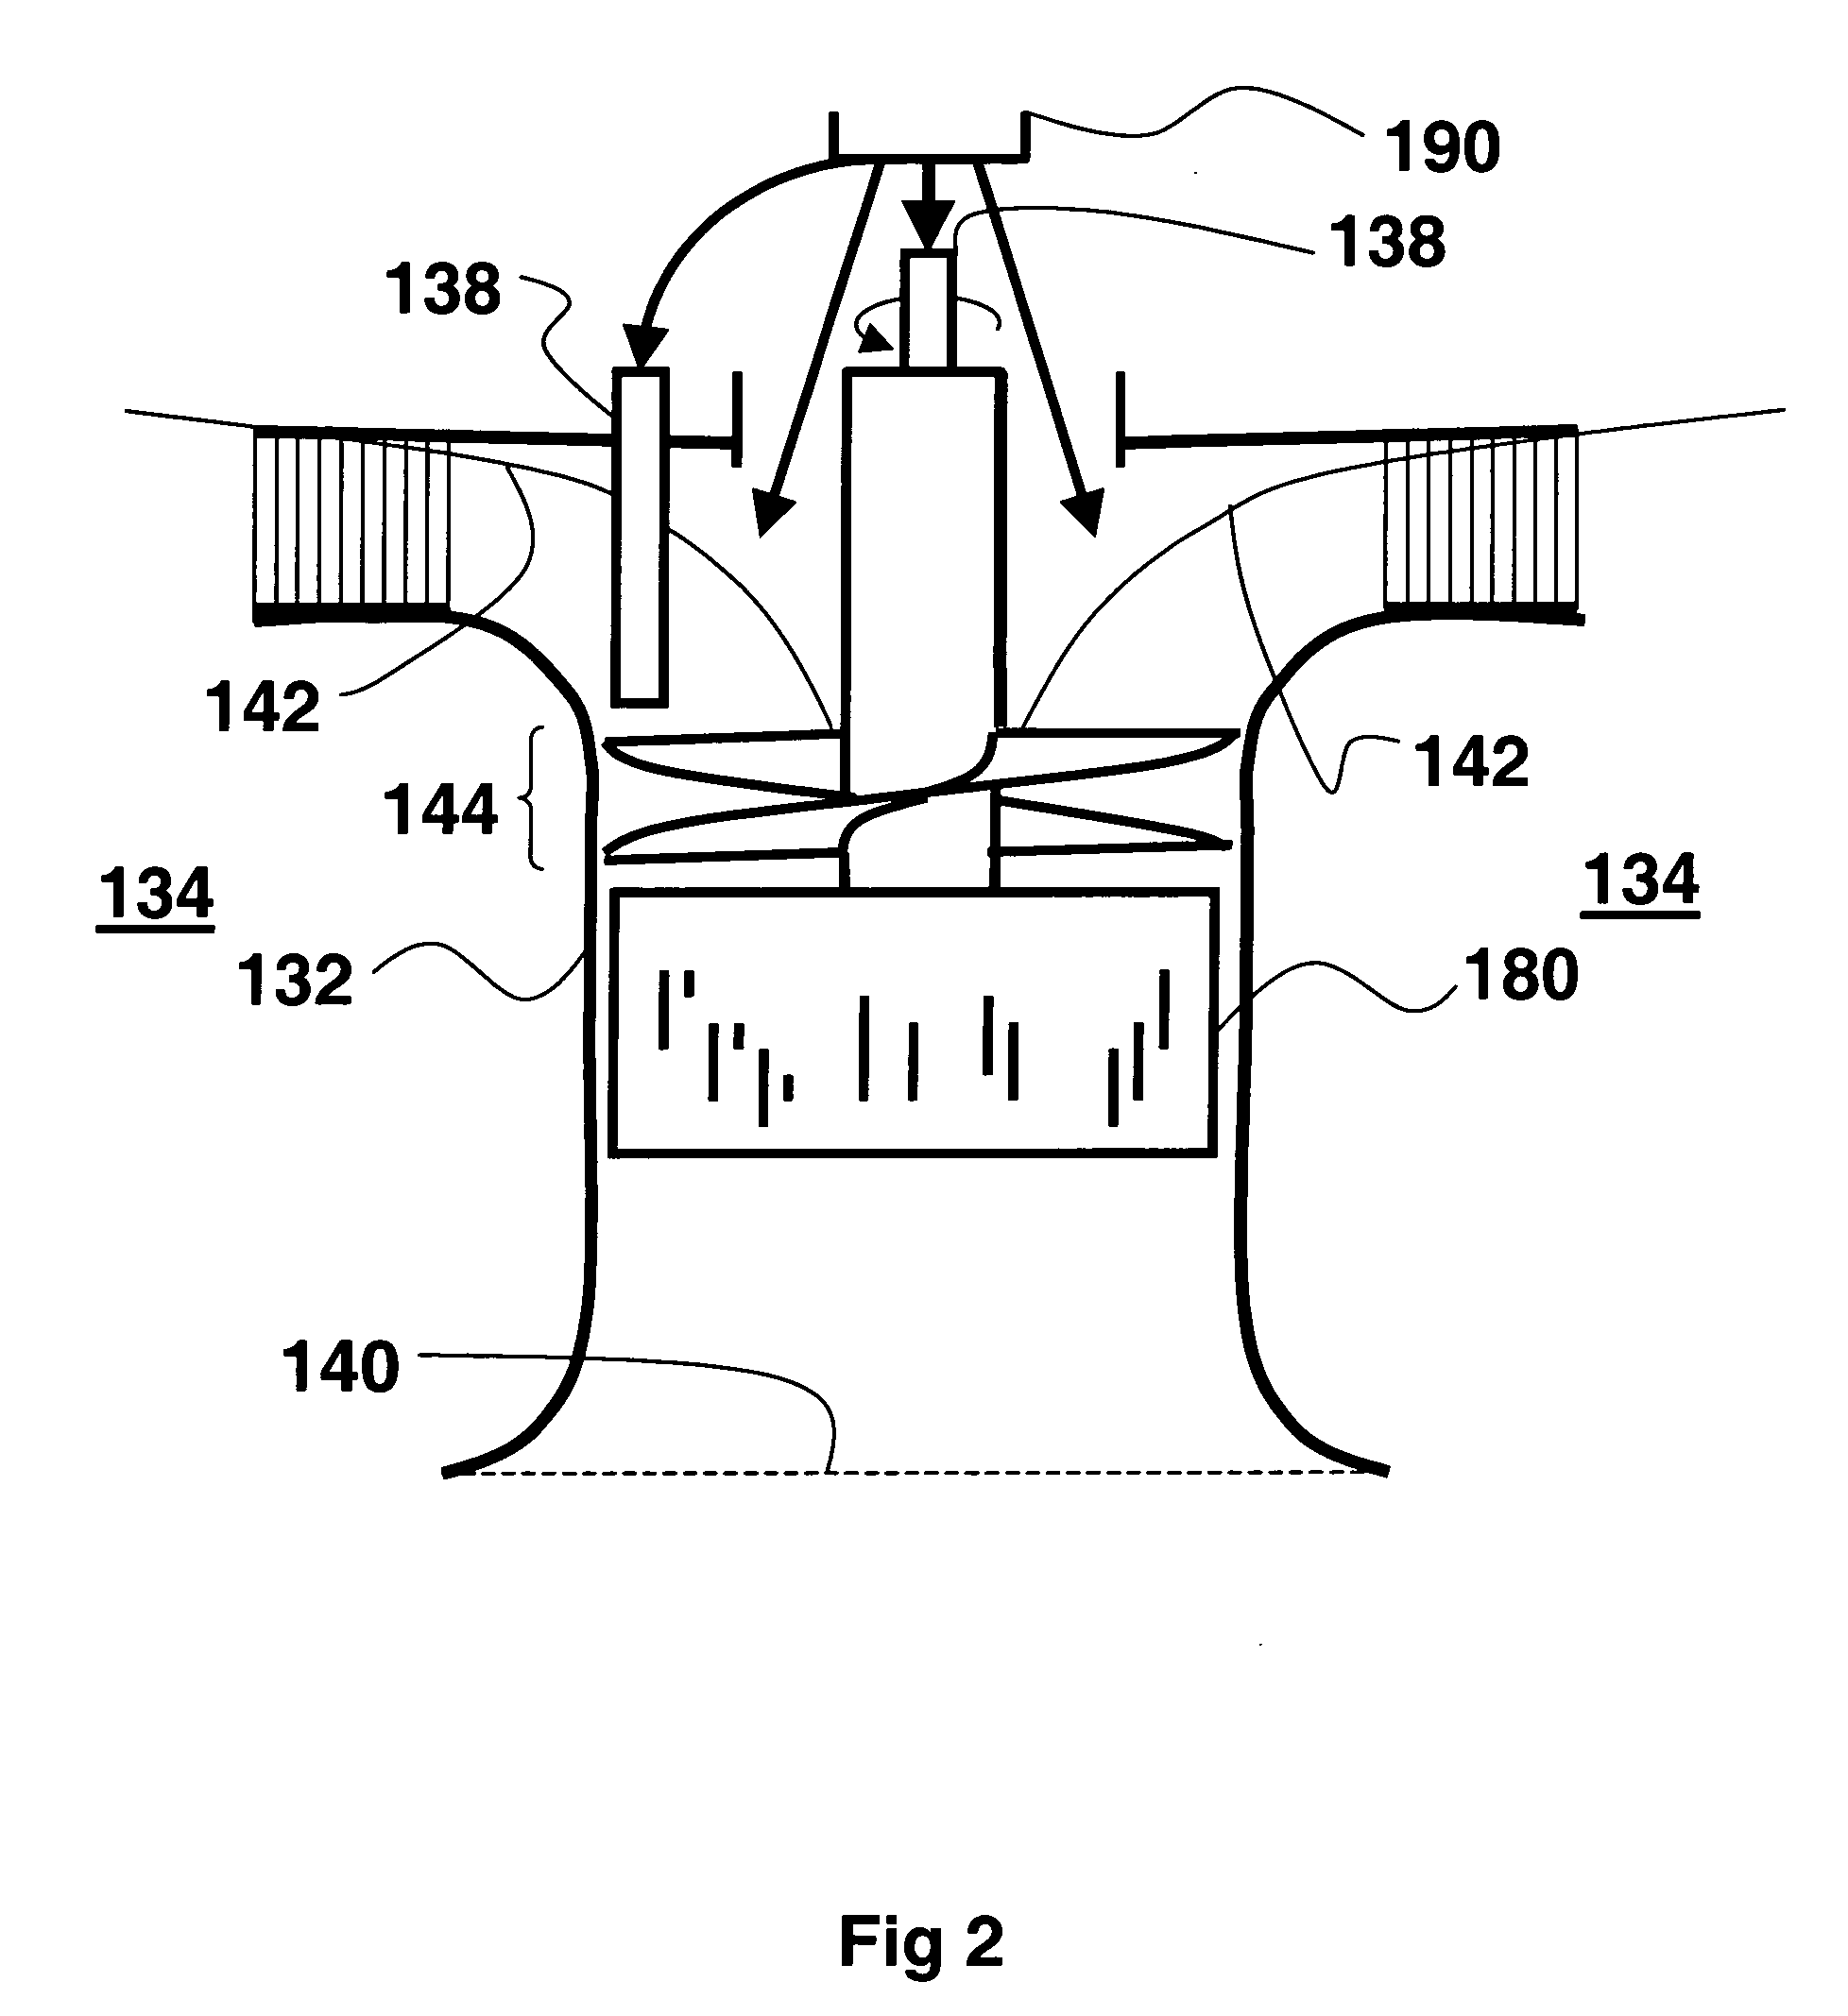 Apparatus and method for diffused aeration